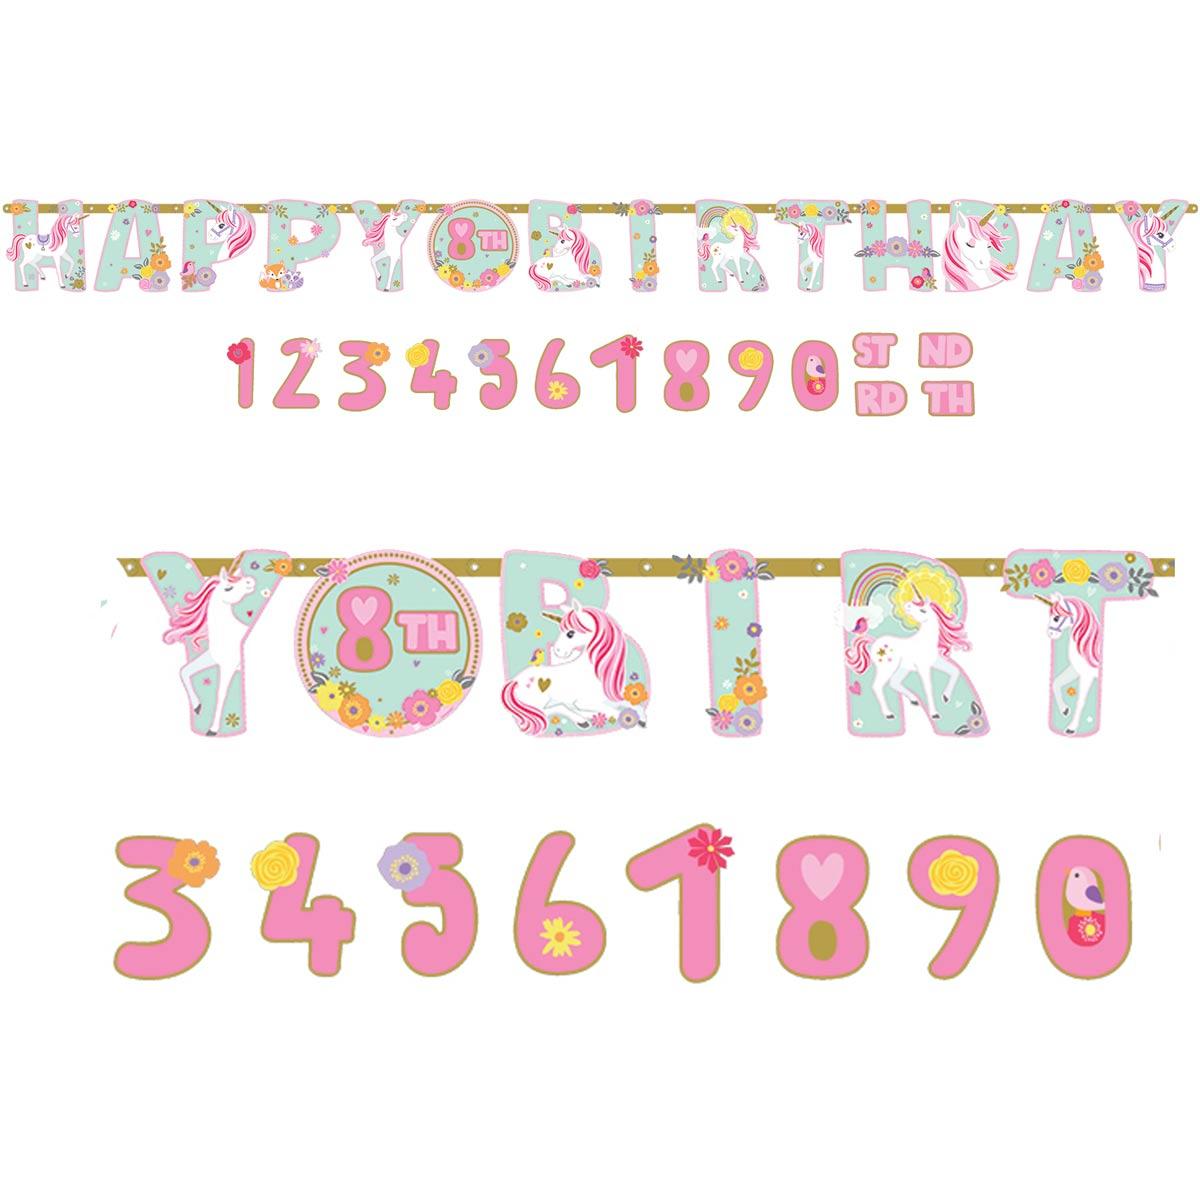 Magical Unicorn Letter Banner - 3.2m Add an Age Banner Kit by Amscan 120340 available here at Karnival Costumes online party shop